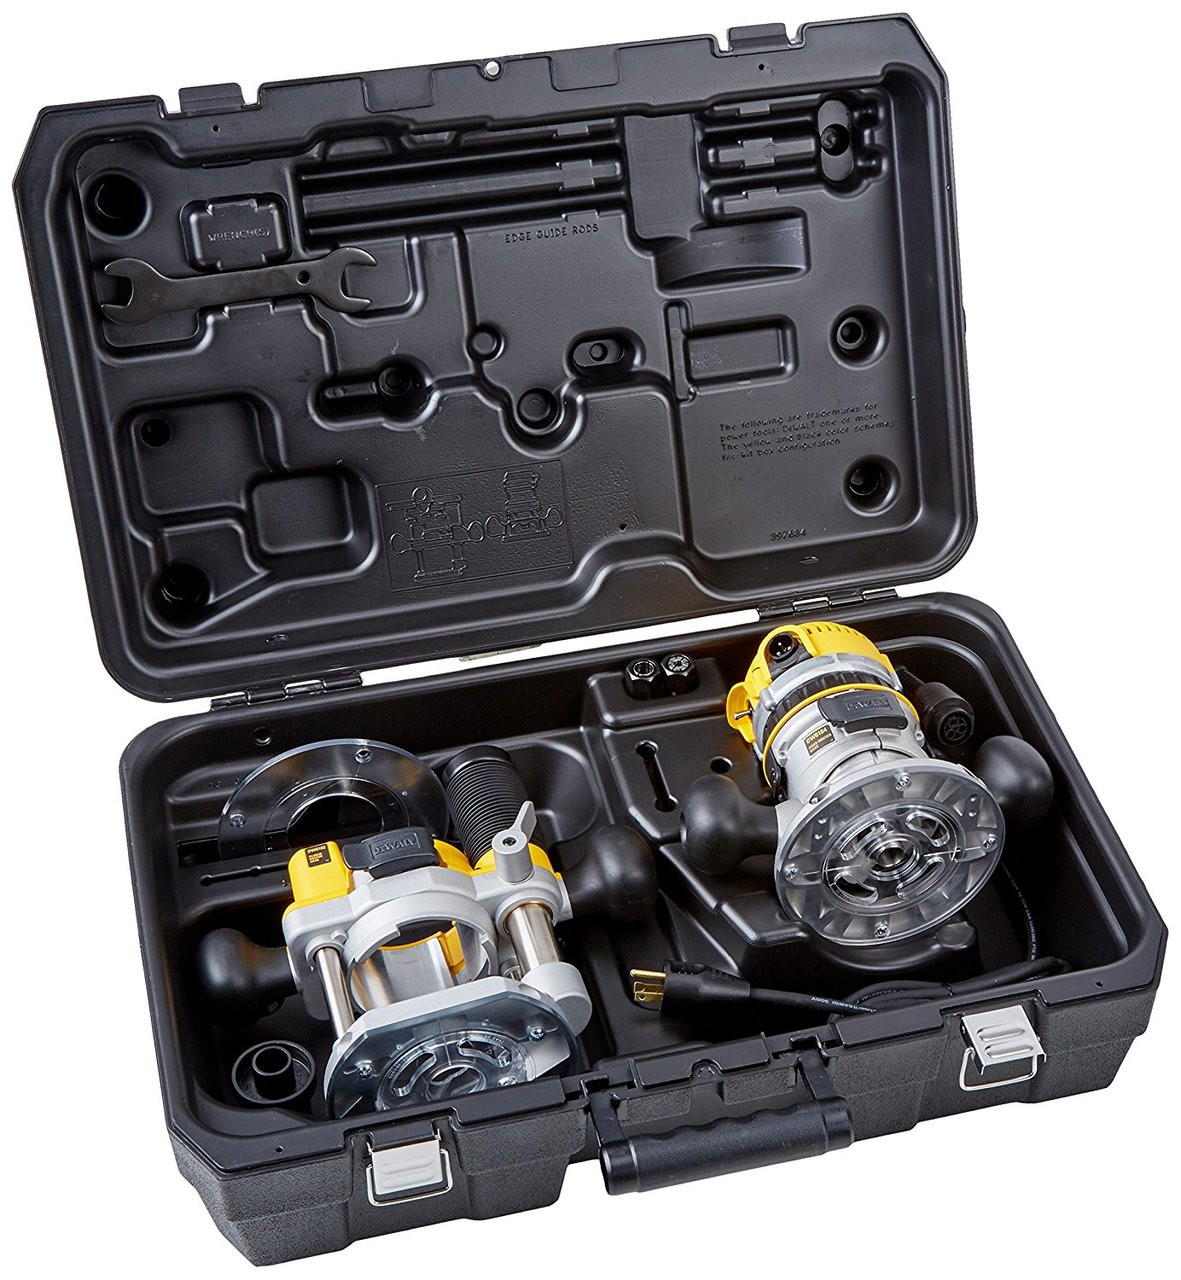 DEWALT DEW-DW618PK 12 AMP 2-1/4 HP Plunge- and Fixed-Base Variable-Speed  Router Kit with 1/4-Inch and 1/2-Inch Collets Atlas-Machinery